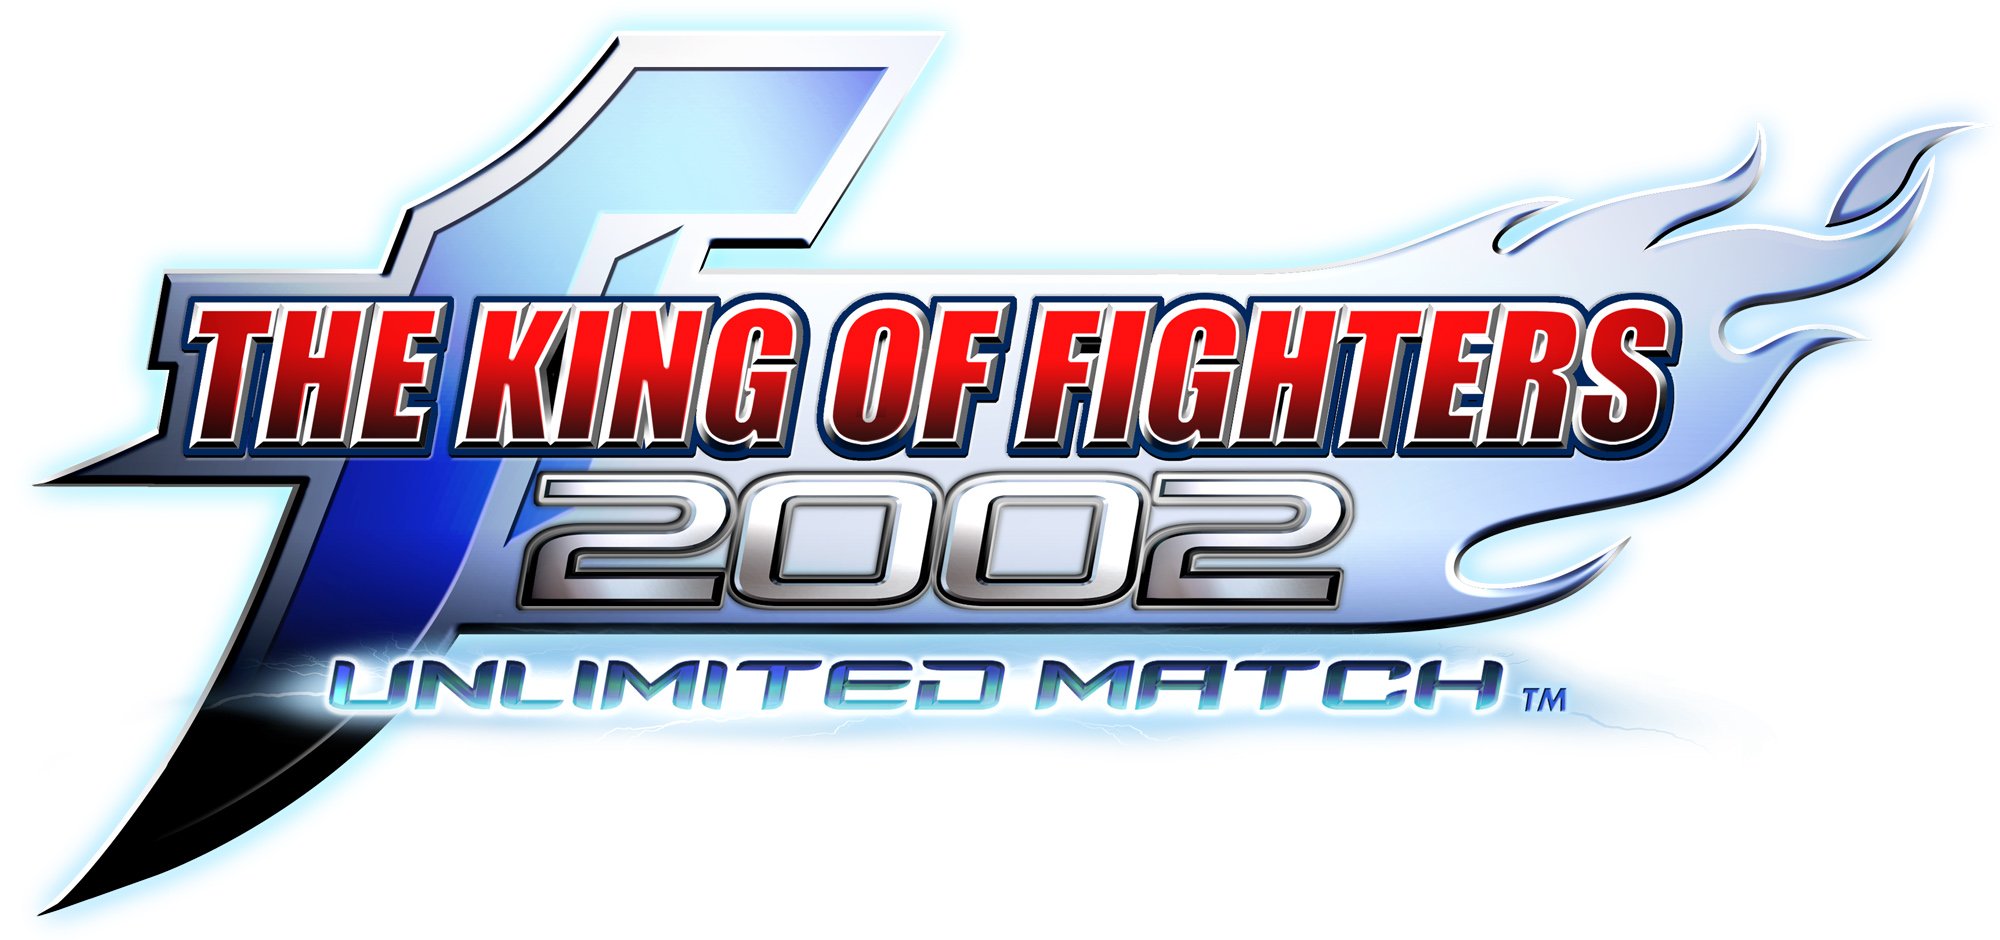 KoF 2002 Unlimited Match now available on PS4 - Video Game Reviews, News,  Streams and more - myGamer